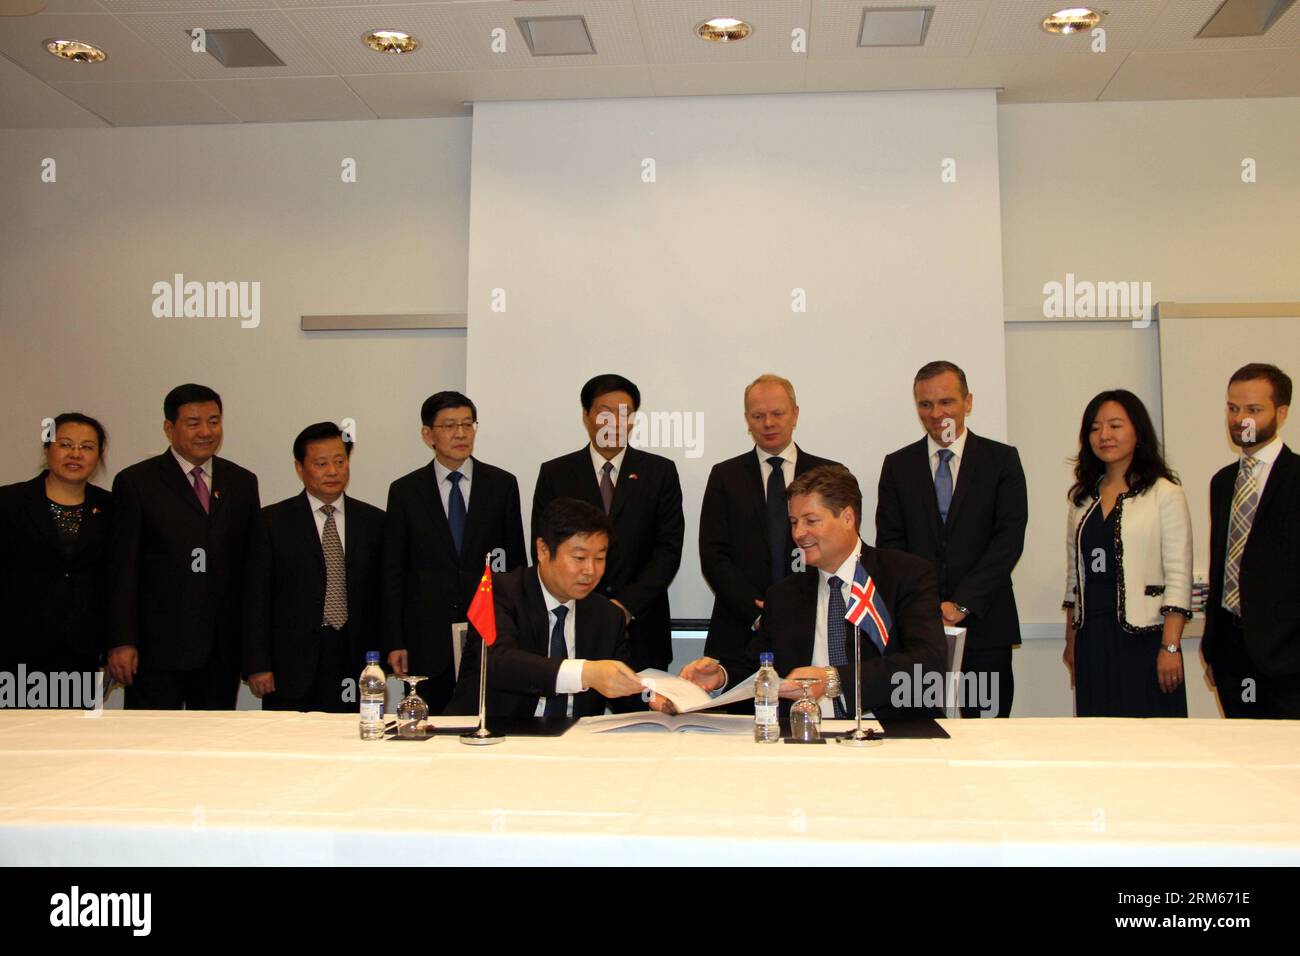 Bildnummer: 60829171  Datum: 13.12.2013  Copyright: imago/Xinhua     REYKJAVIK, Dec. 13, 2013 - A member of China s Shaanxi provincial delegation (L Front) and a representative of Iceland s Orka Energy Ltd. sign an agreement on expanding cooperation in developing geothermal resources, in Reykjavik, capital of Iceland, Dec. 13, 2013. (Xinhua/Xie Binbin) (lyx) ICELAND-CHINA-GEOTHERMAL ENERGY-COOPERATION PUBLICATIONxNOTxINxCHN People Politik xdp x0x 2013 quer premiumd Stock Photo